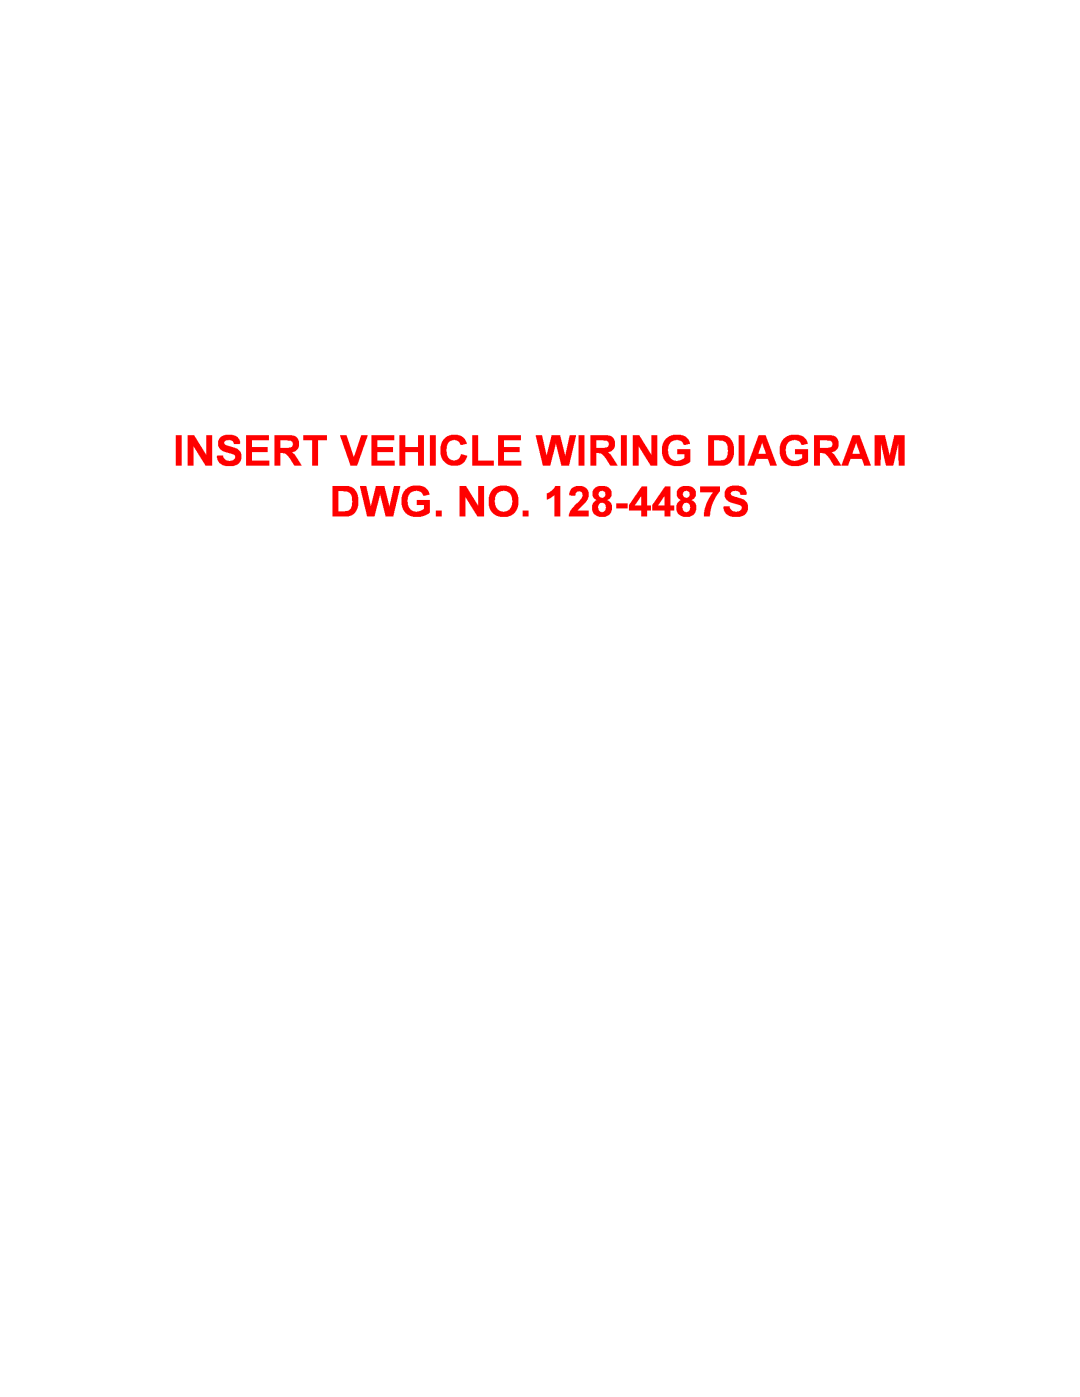 Shopsmith none installation manual INSERT VEHICLE WIRING DIAGRAM DWG. NO. 128-4487S 